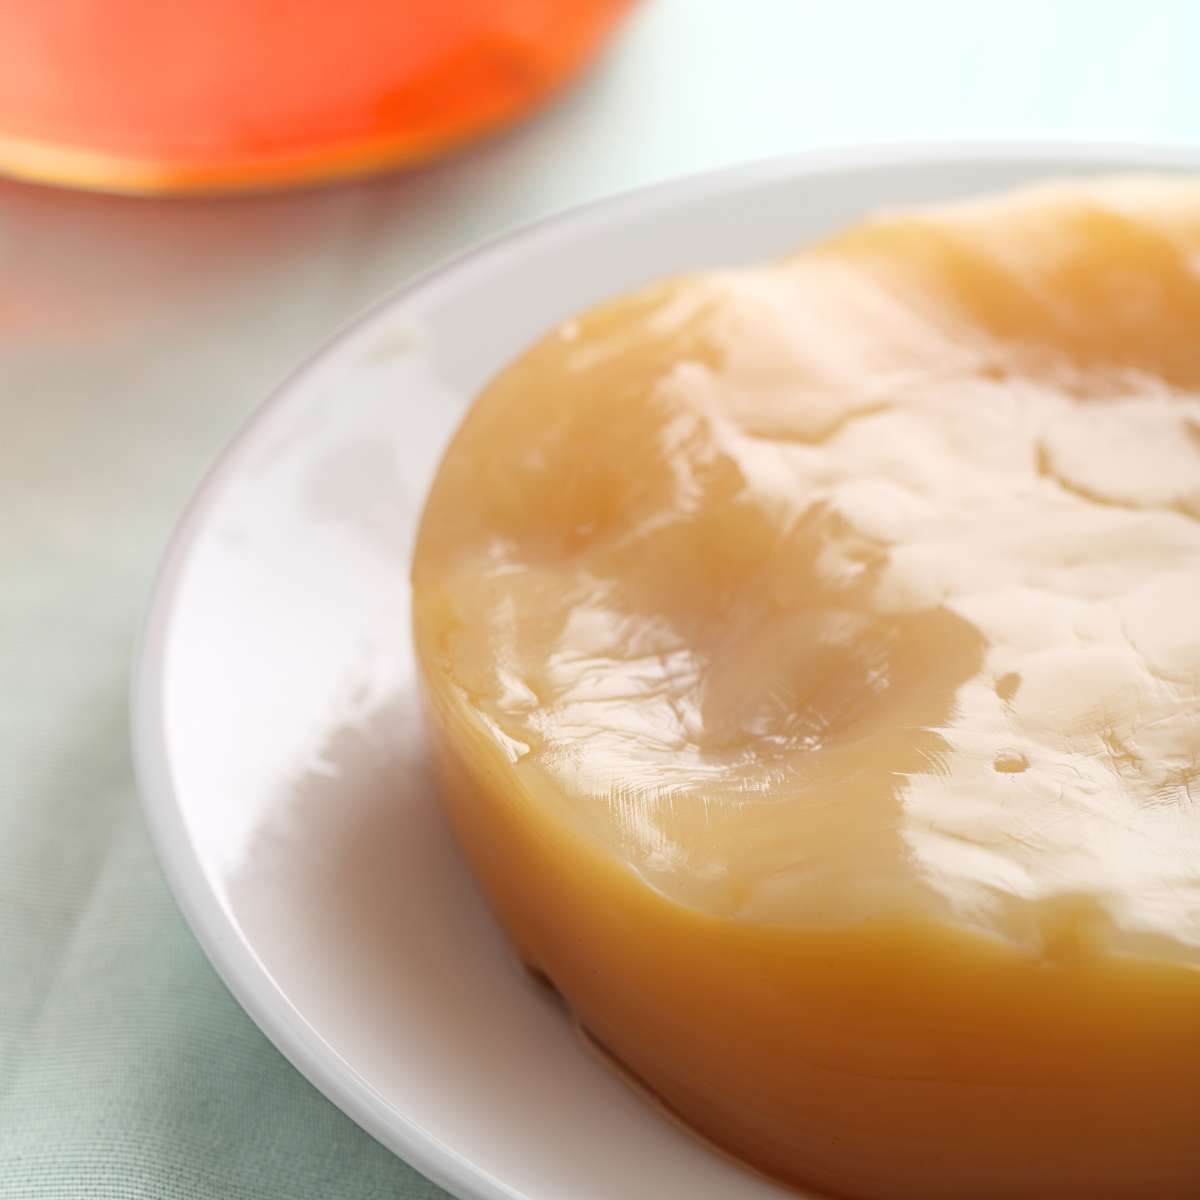 A close up picture of a healthy Kombucha SCOBY. It is tan in color and sitting on a white plate that is resting near a jar of kombucha tea.